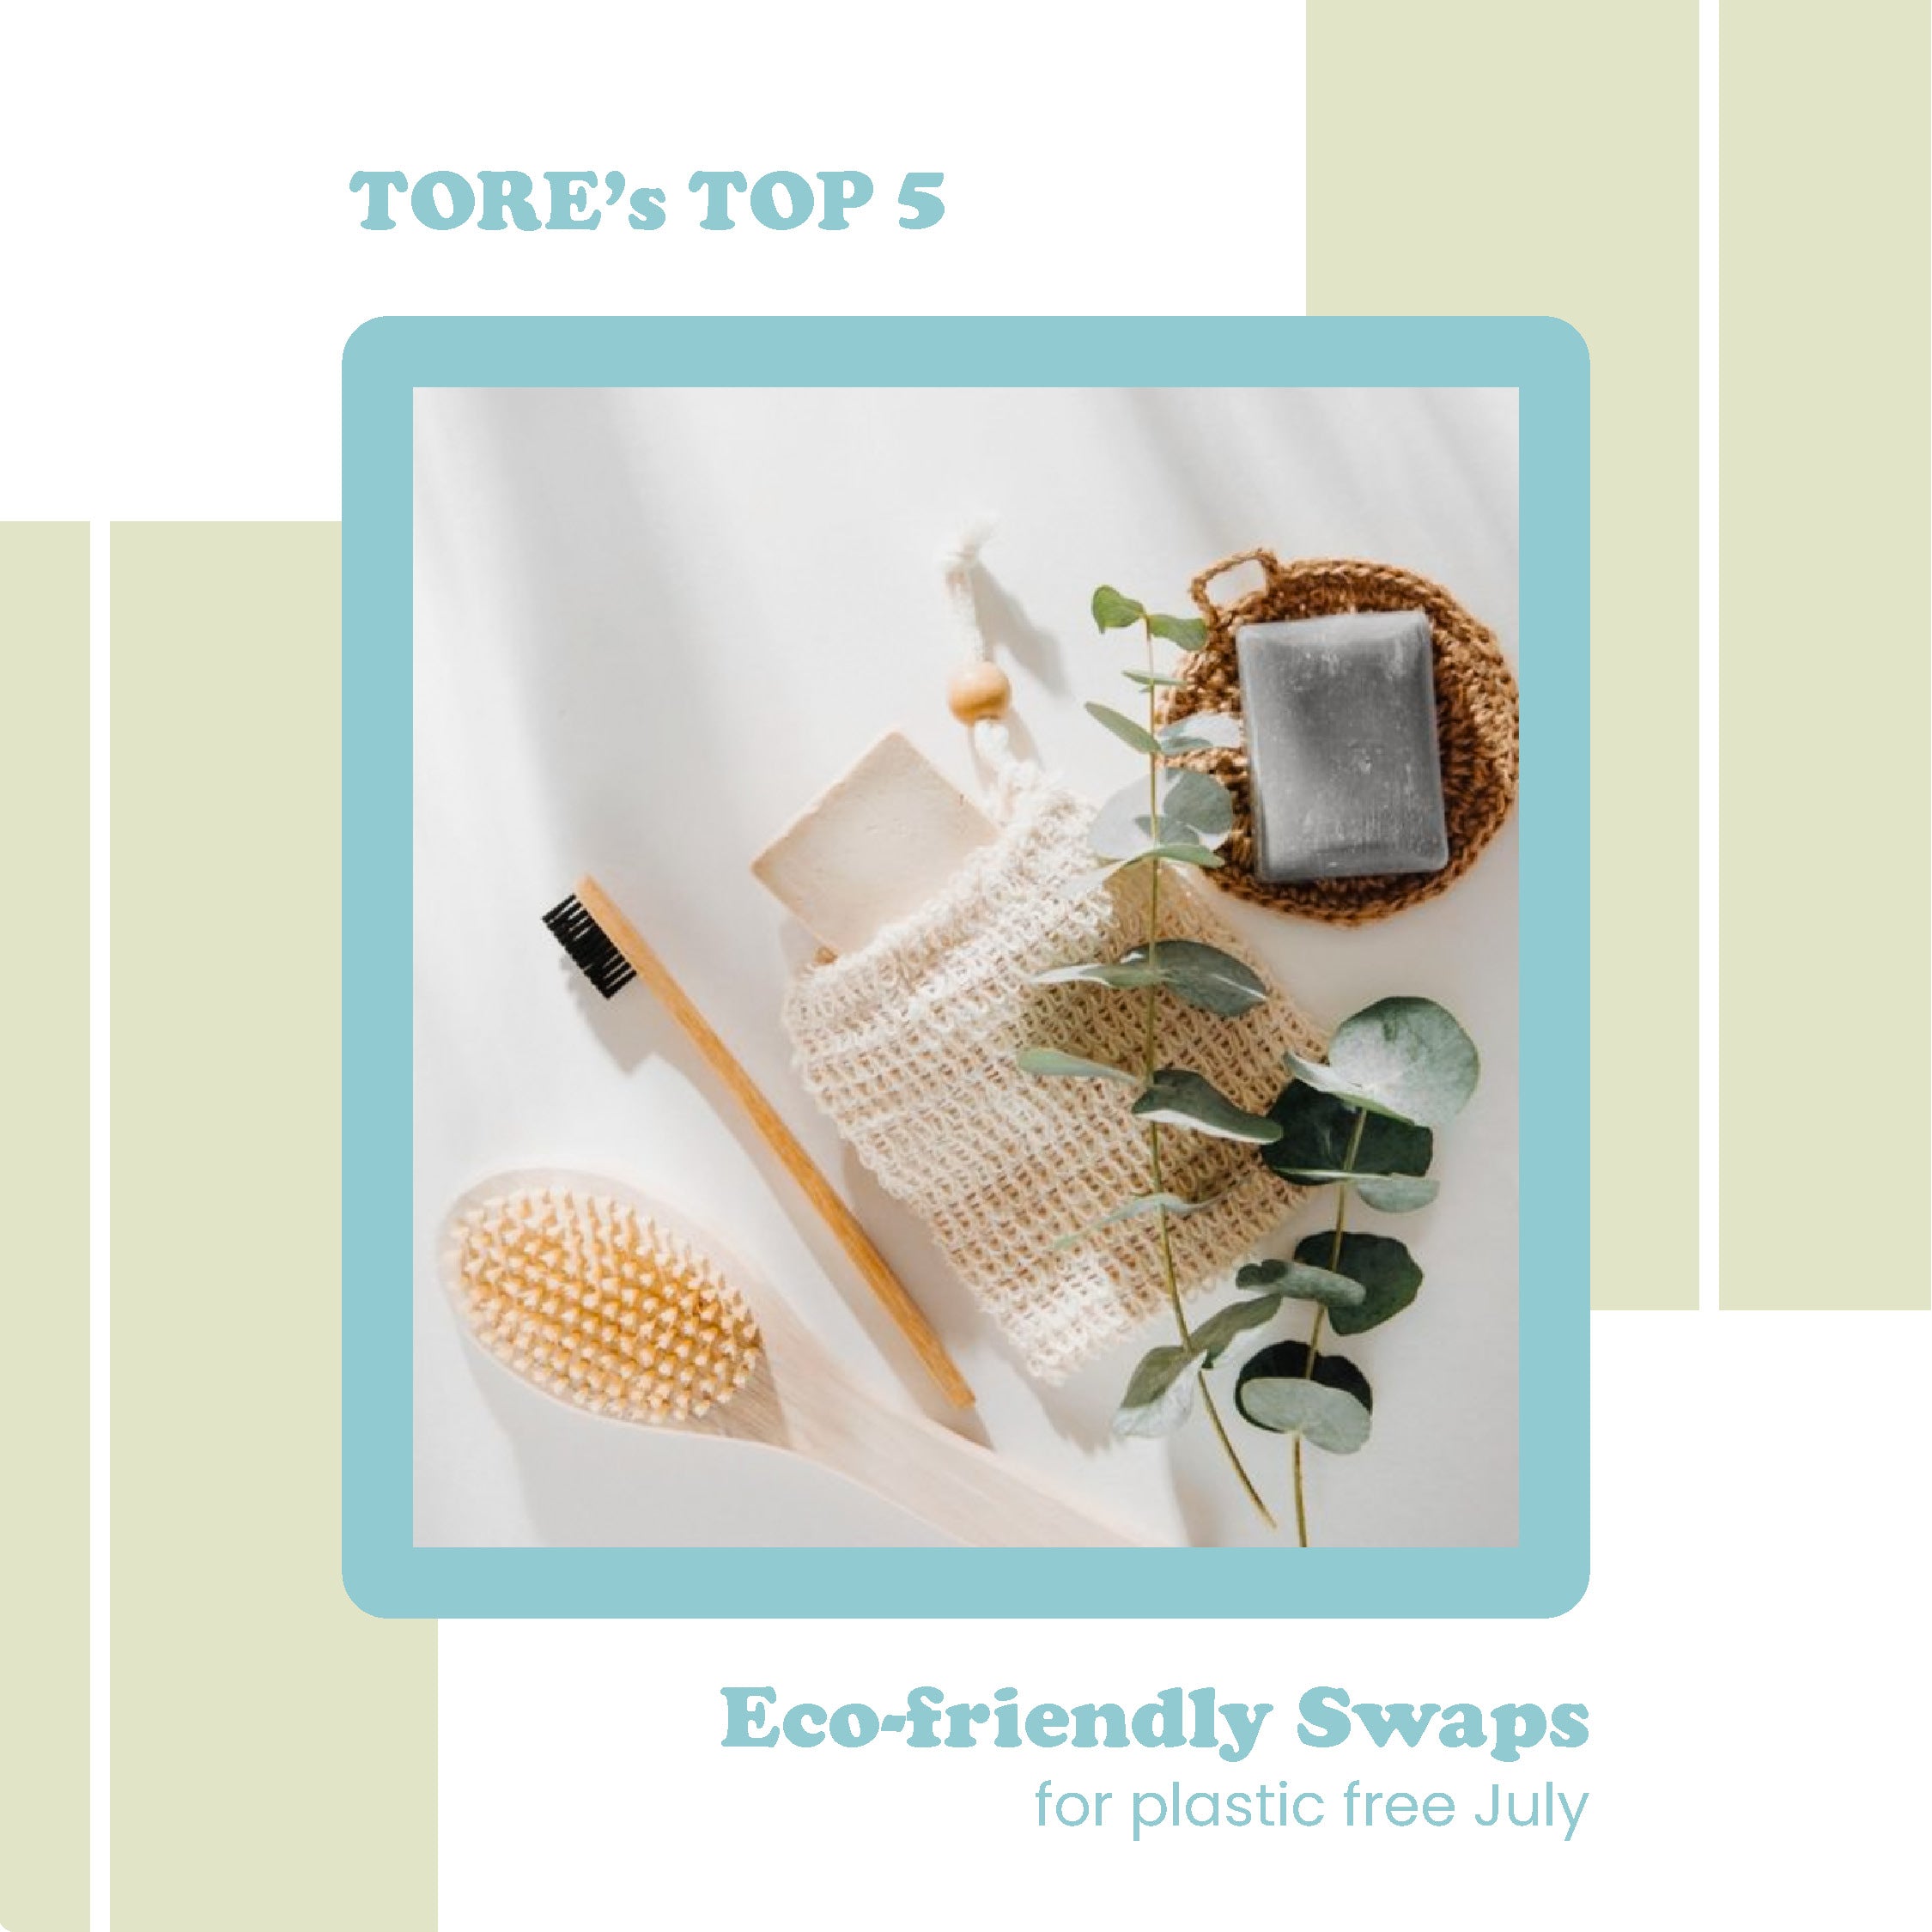 TORE's Top 5 Tips for Plastic-Free July